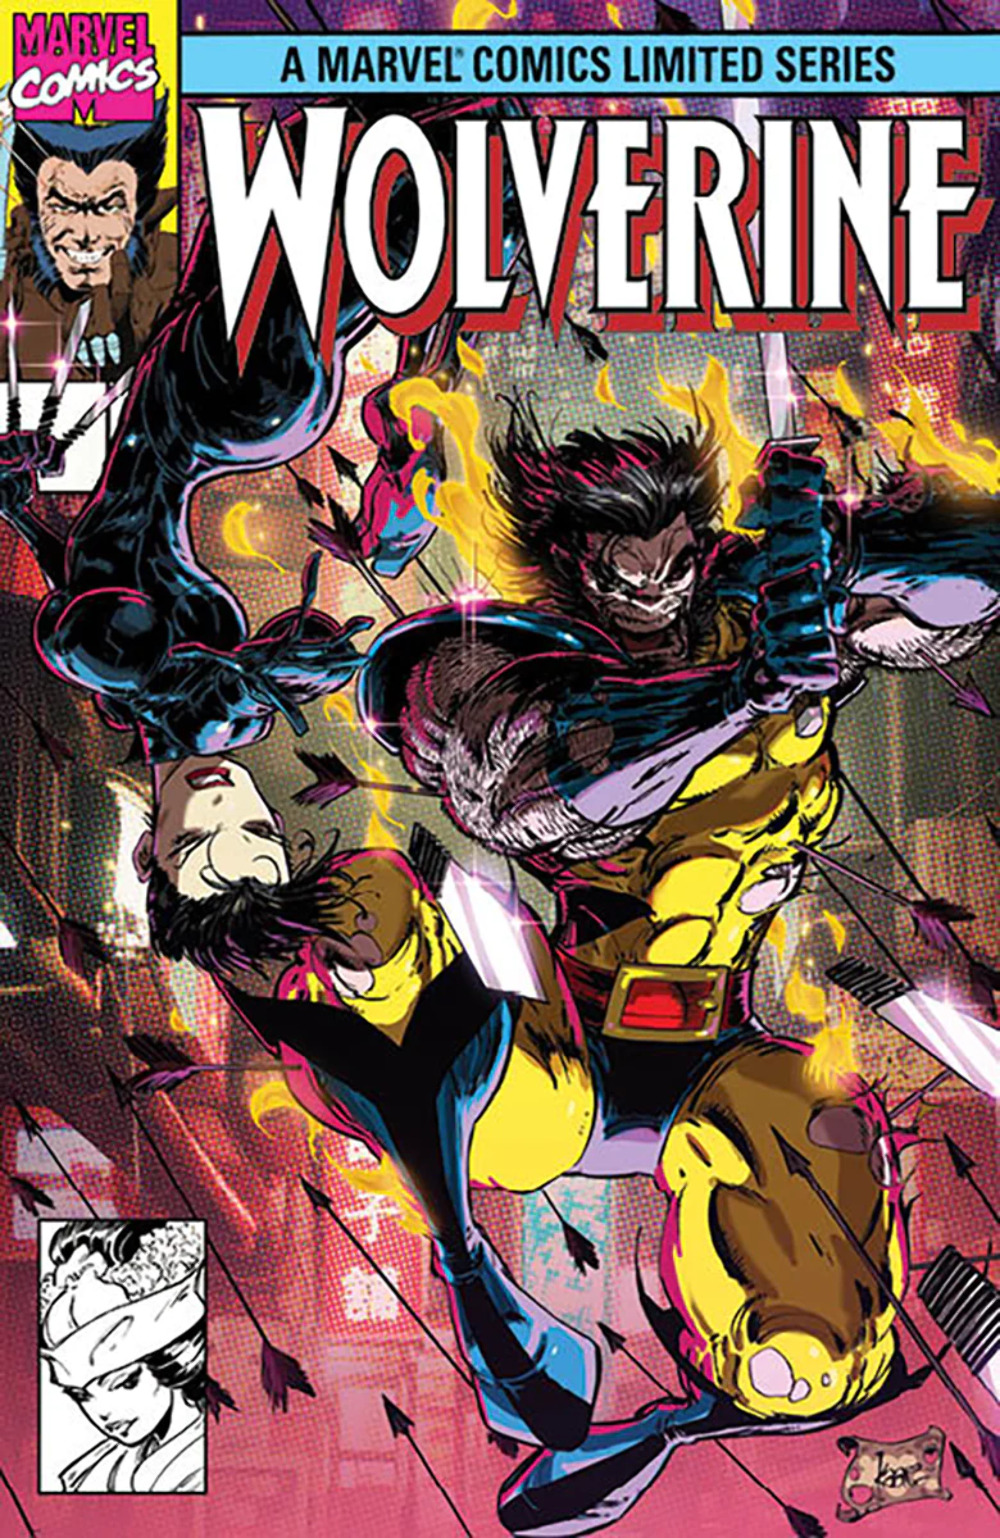 WOLVERINE BY CLAREMONT & MILLER #1 FACSIMILE EDITION [NEW PRINTING] UNKNOWN COMI